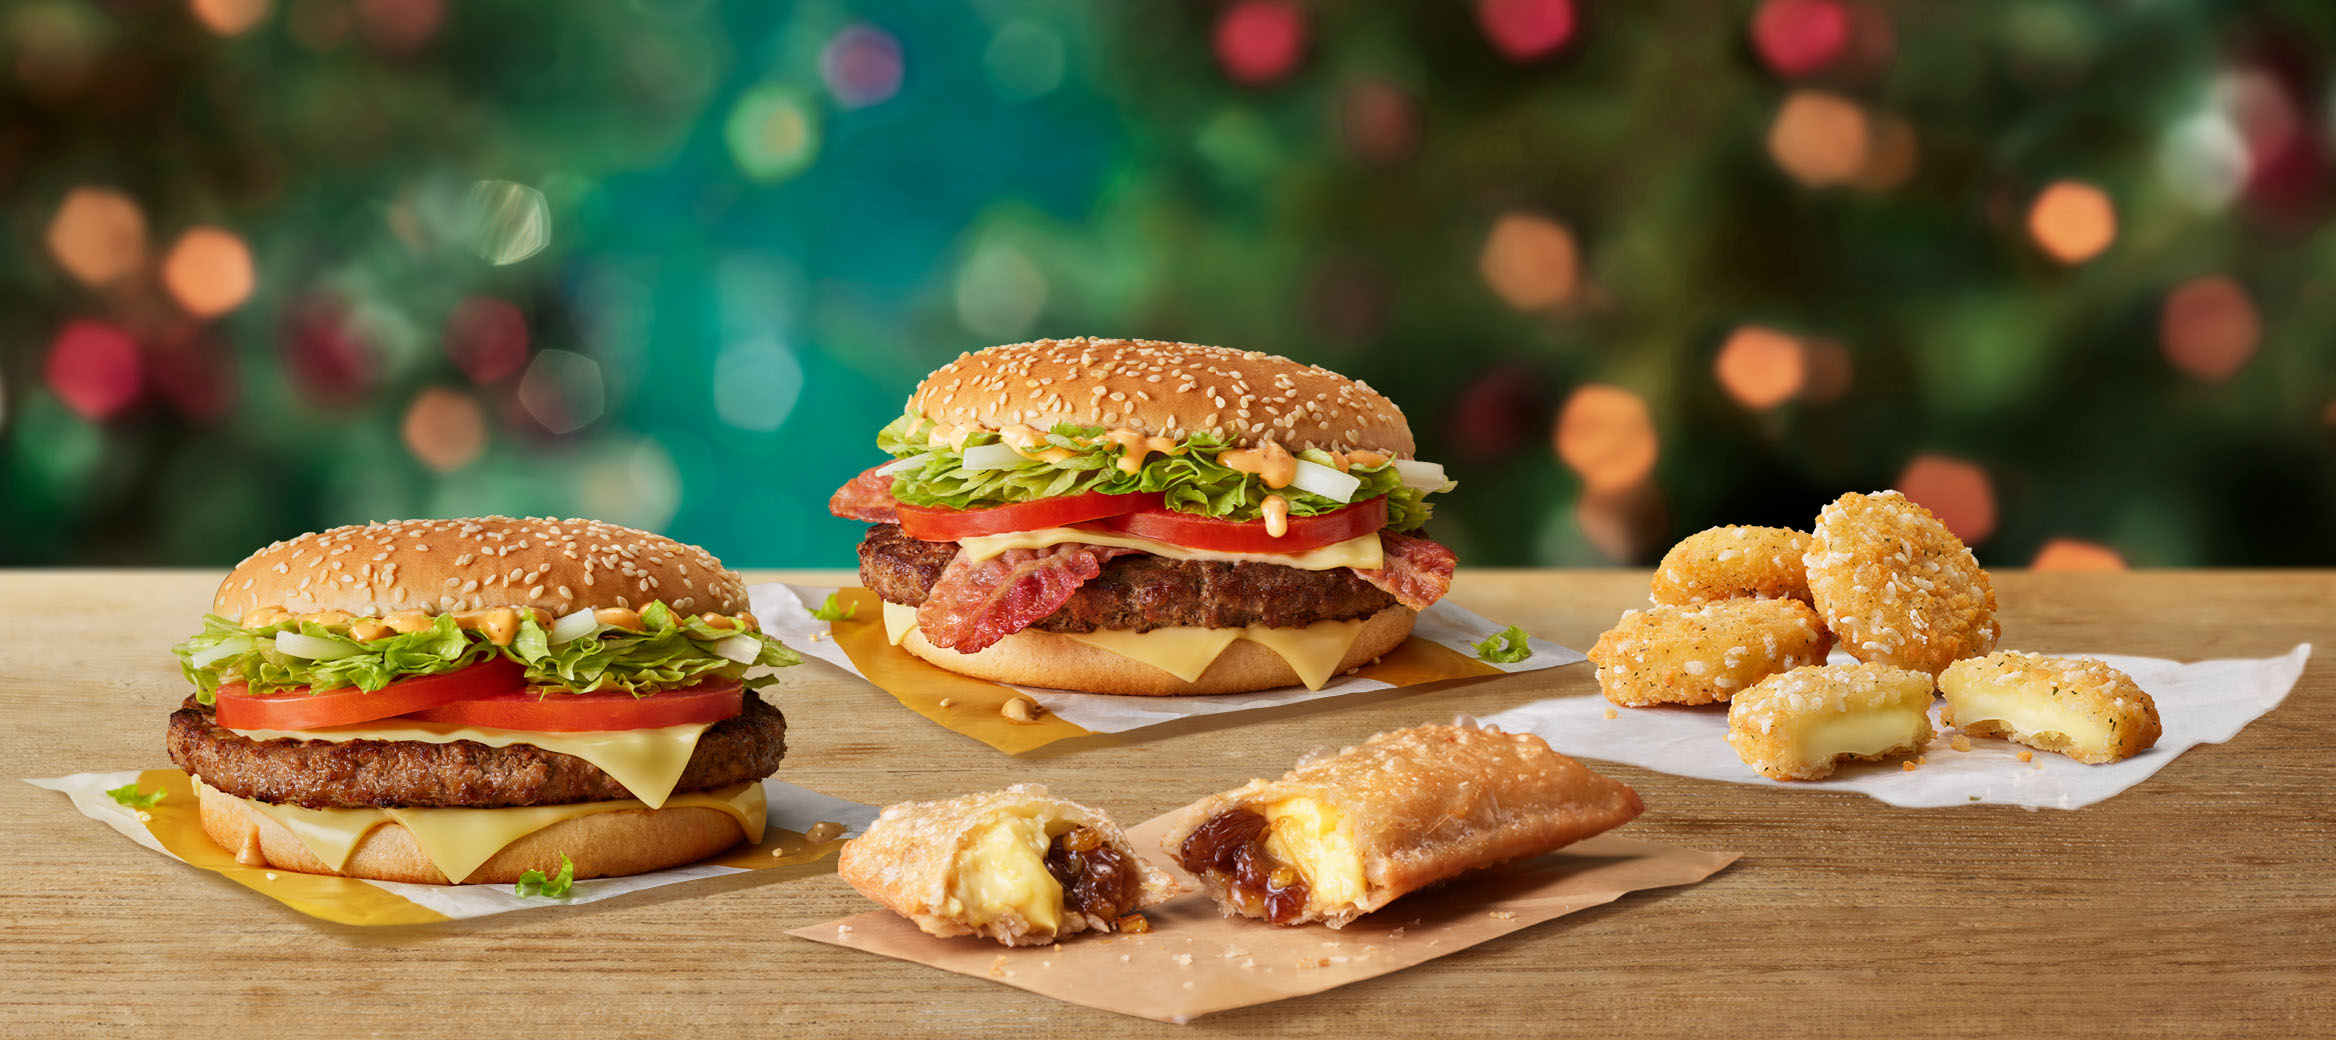 Big Tasty, Big Tasty with Bacon, Cheese Melt Dippers and a Festive Pie on a table with a Christmas background.